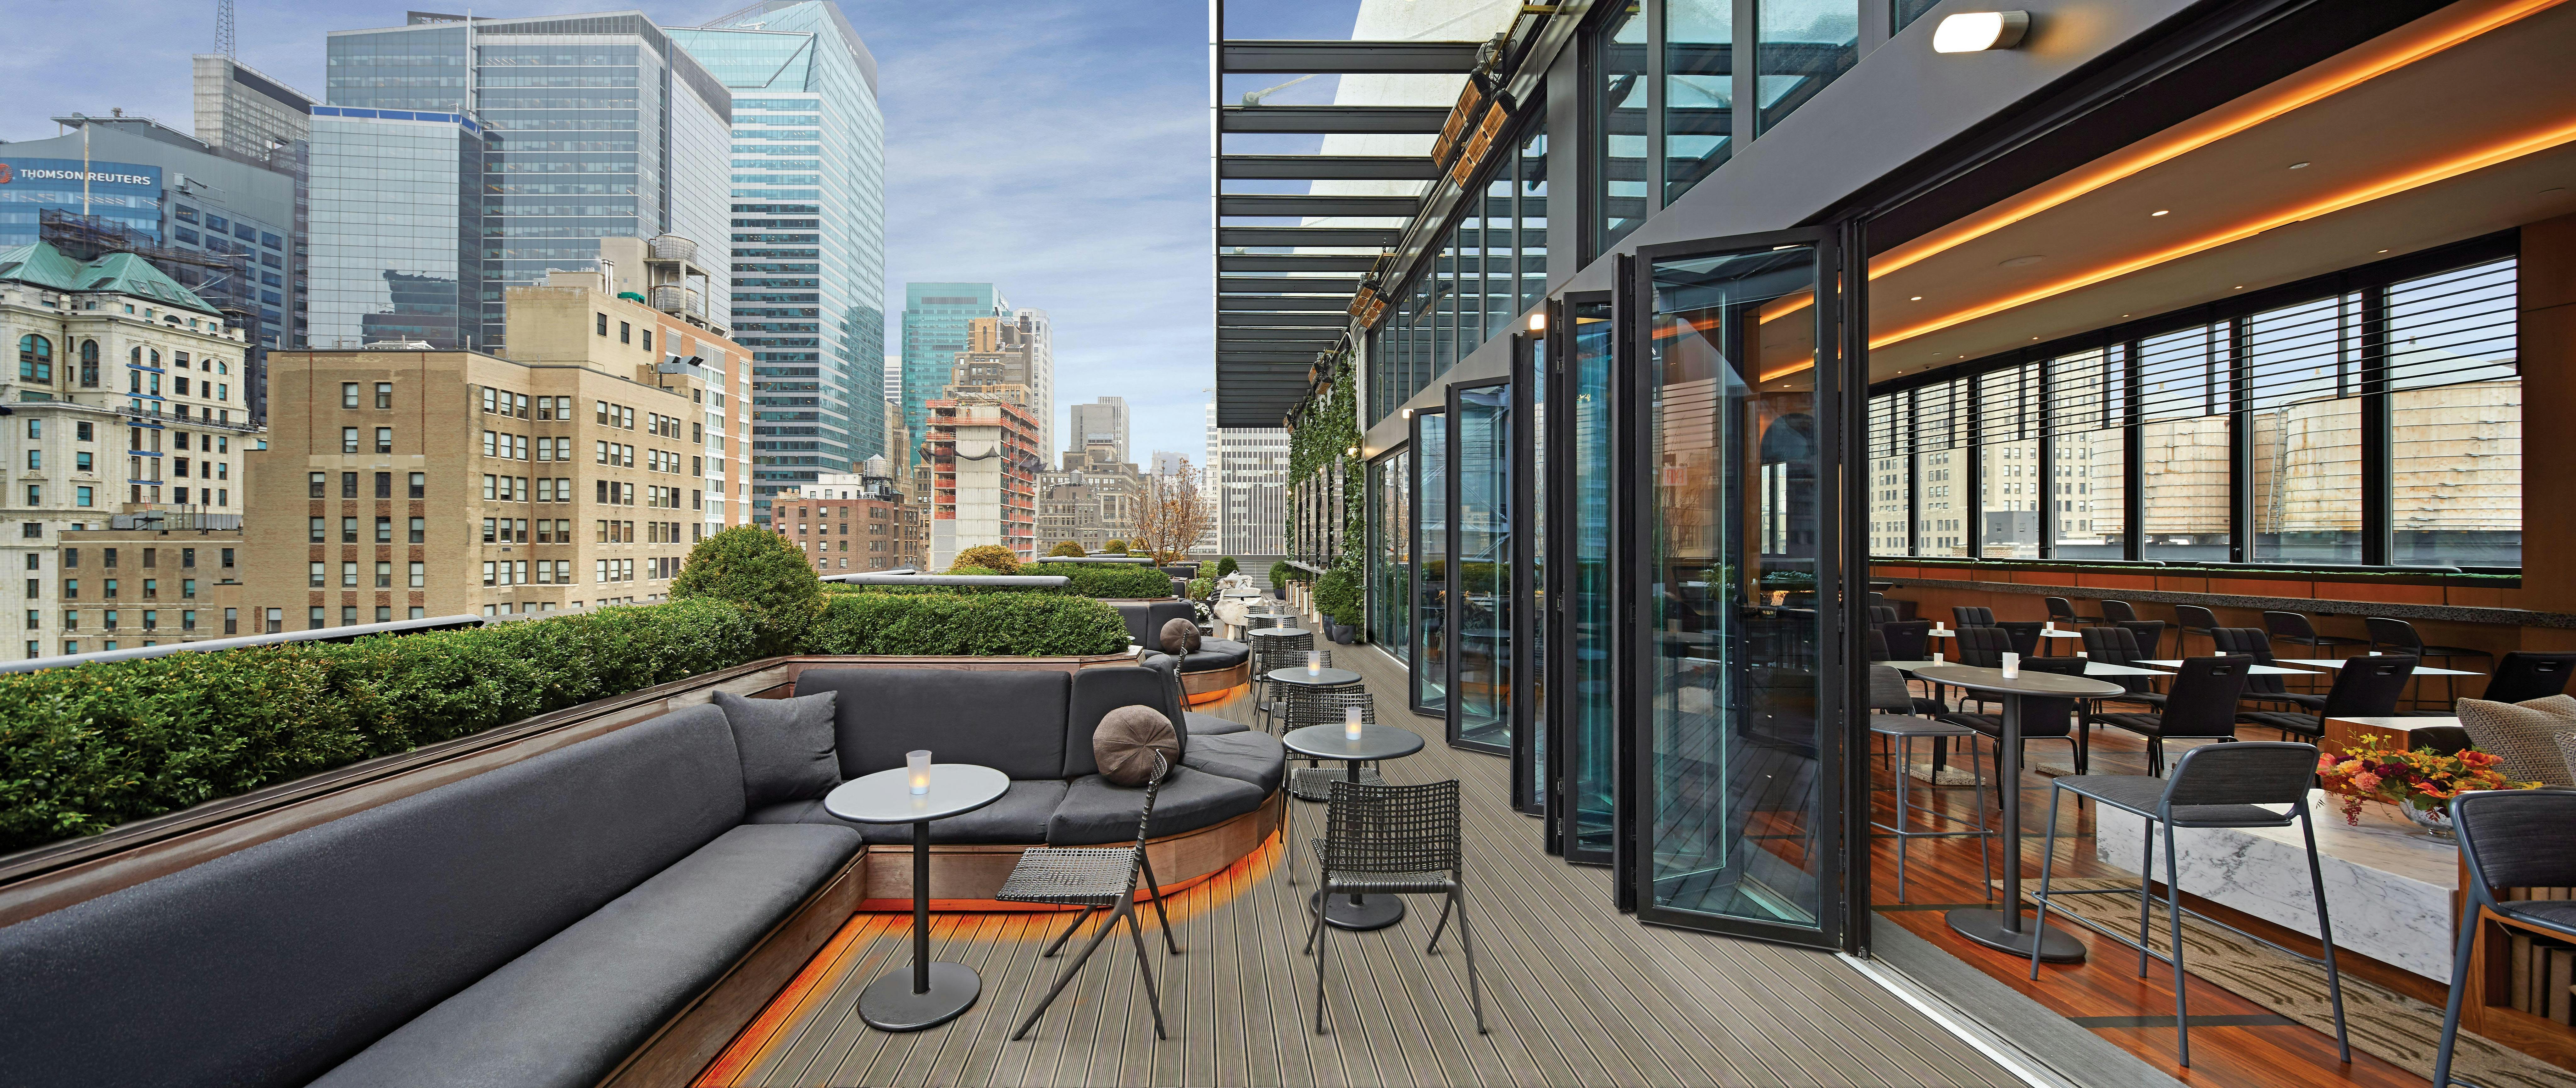 rooftop bar and restaurant in new york city with folding glass walls open to the balcony